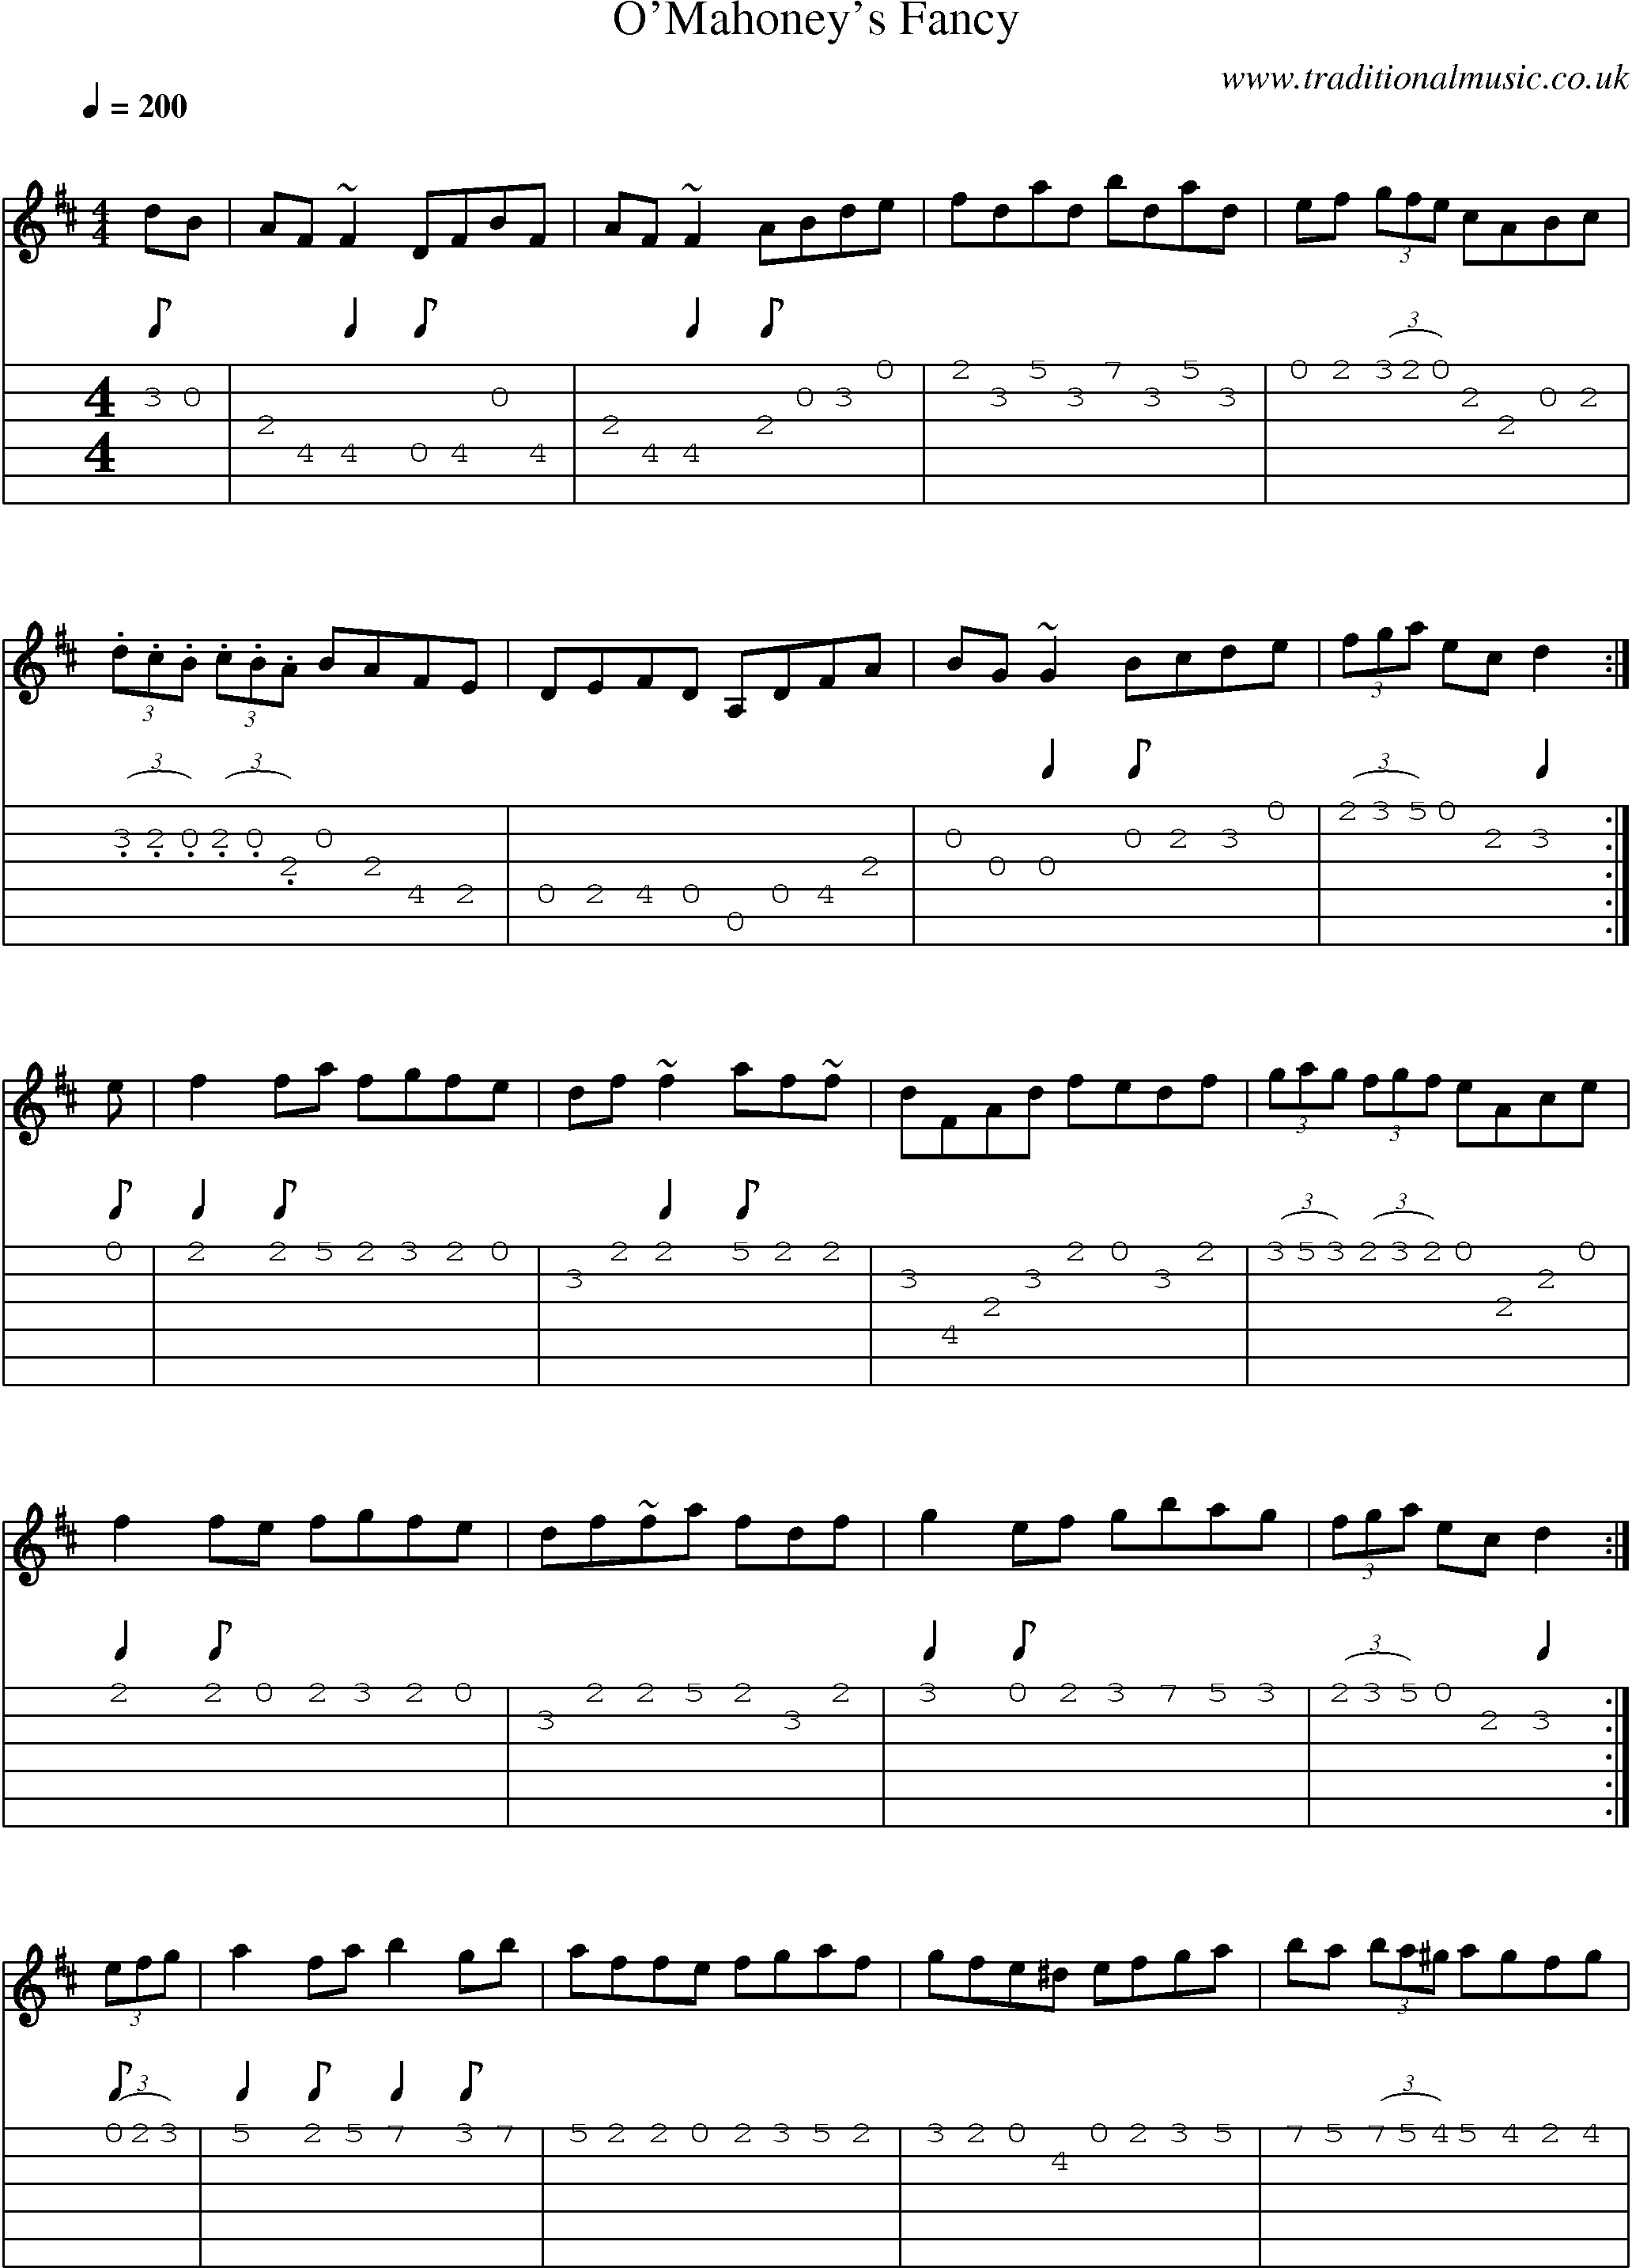 Music Score and Guitar Tabs for Omahoneys Fancy